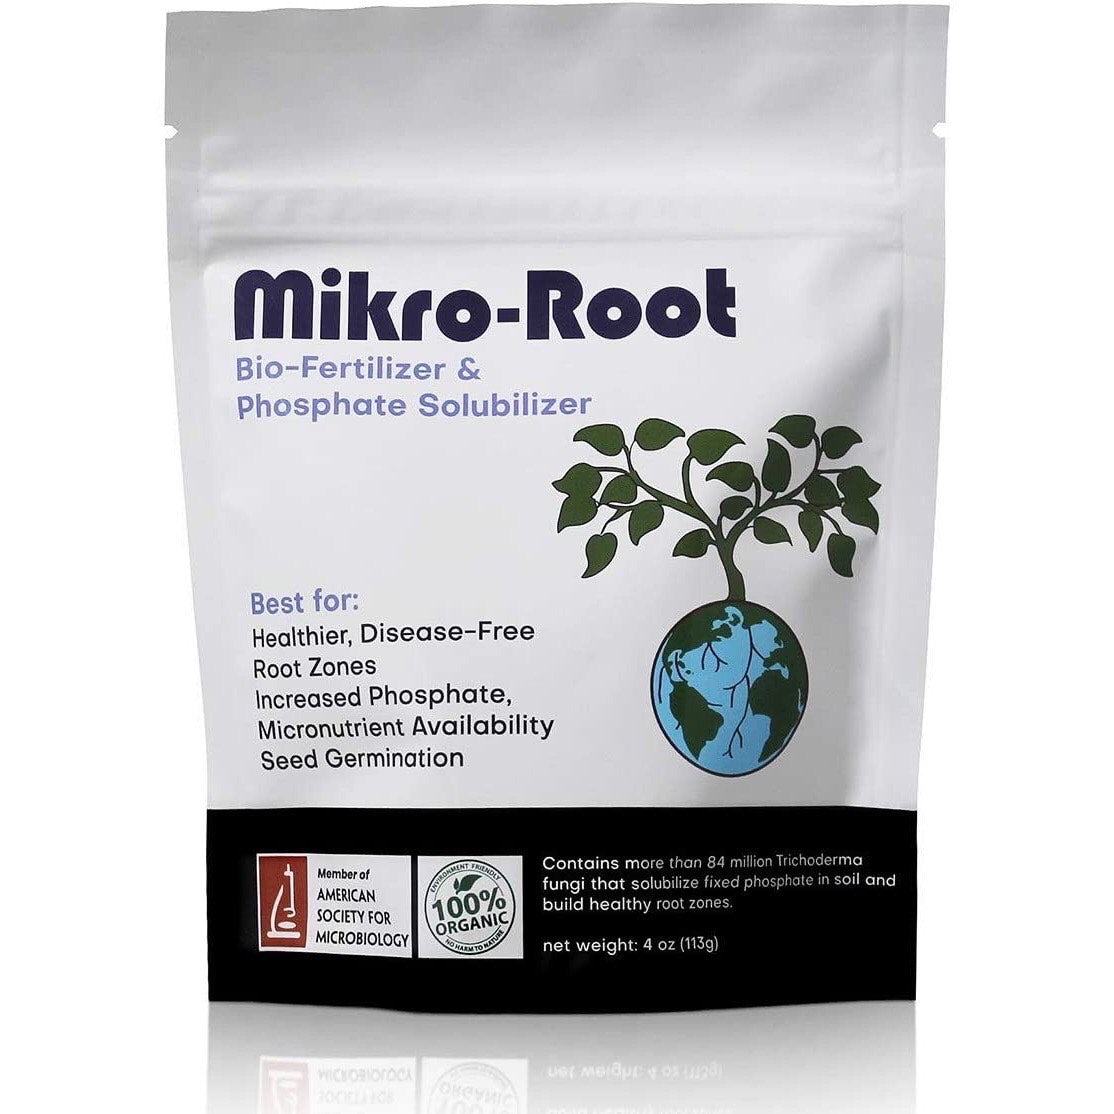 miKro, PRODUCTS